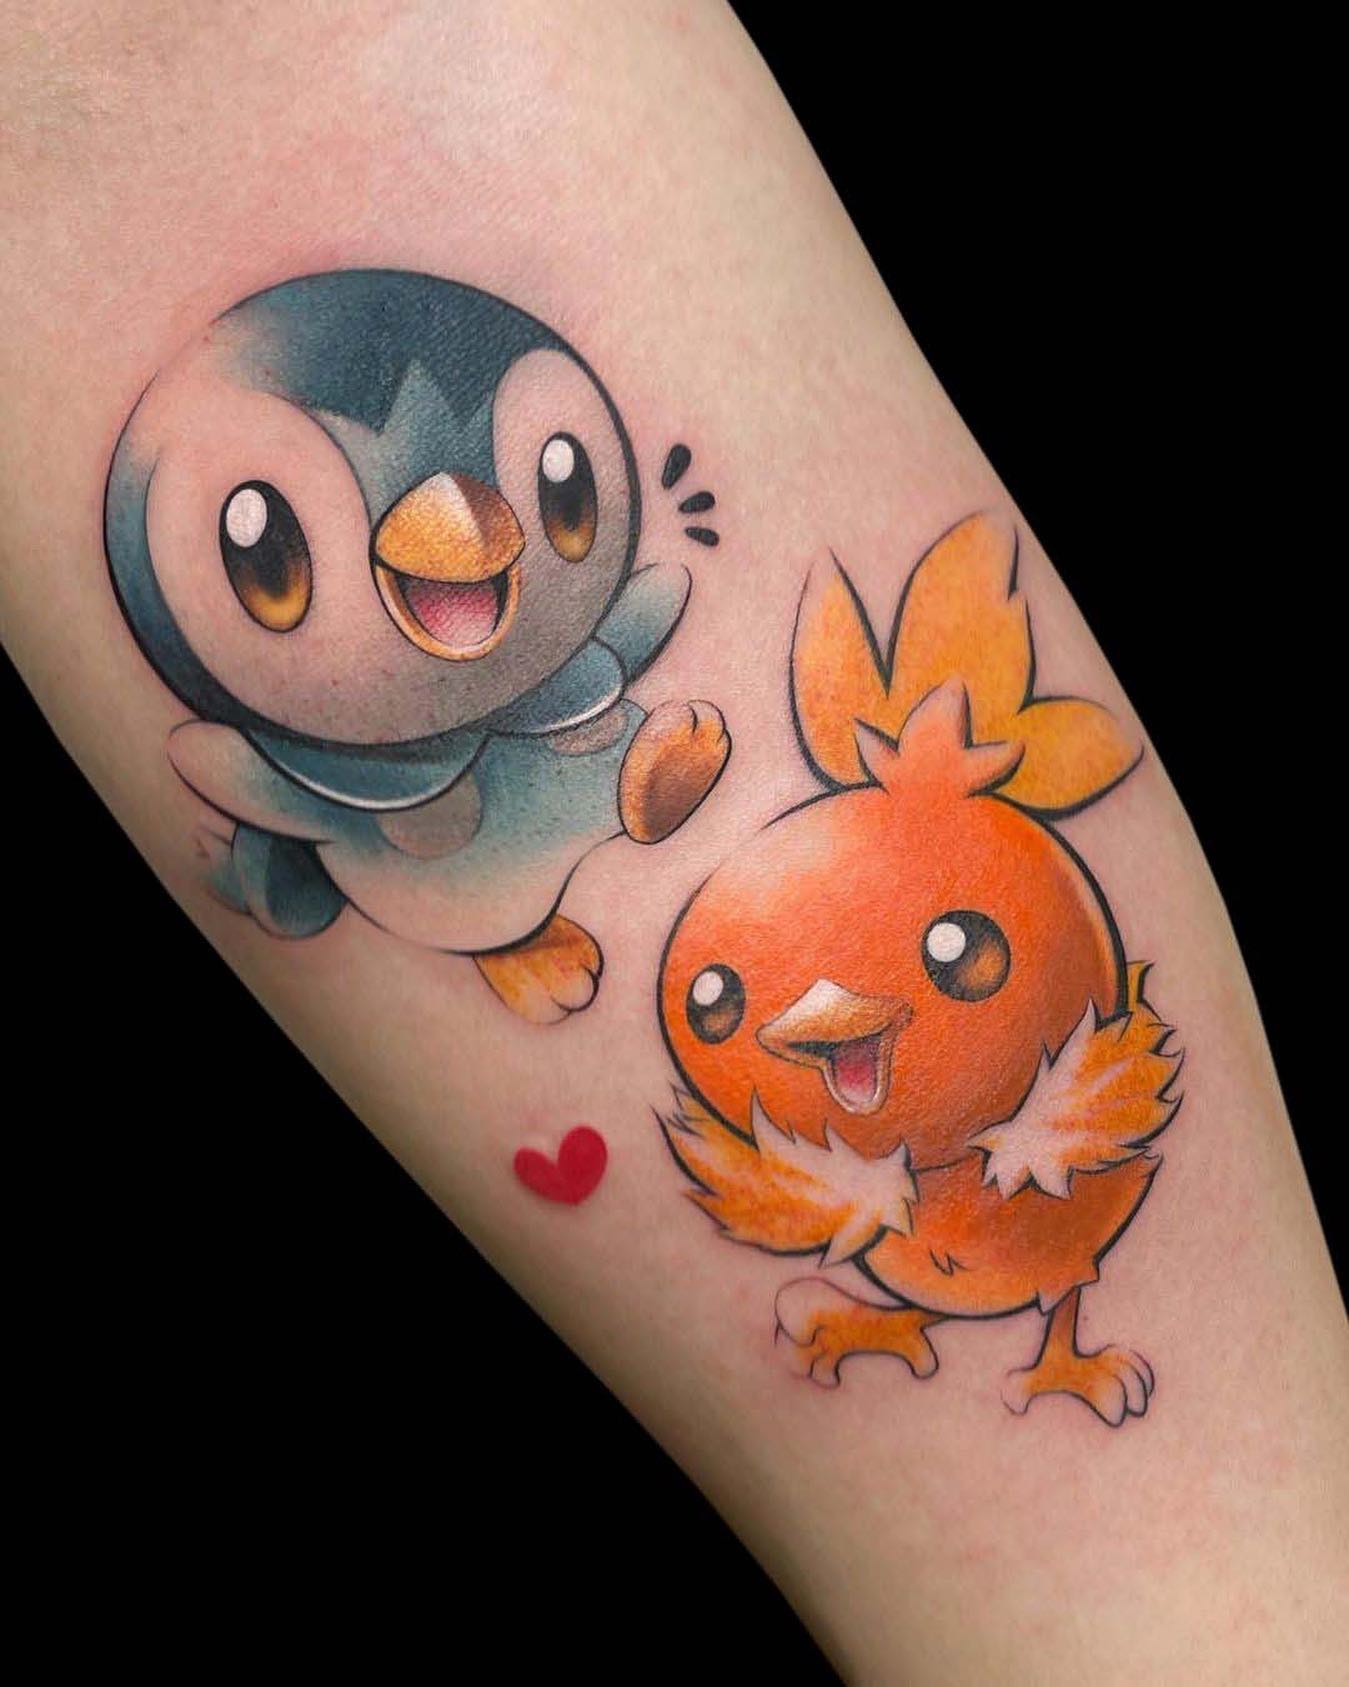 This cute pair is definitely a great choice if you want to have a Pokemon tattoo that rocks! Piplup and Torchic will warm your heart for sure. The little heart symbol between them symbolizes their cuteness, too.